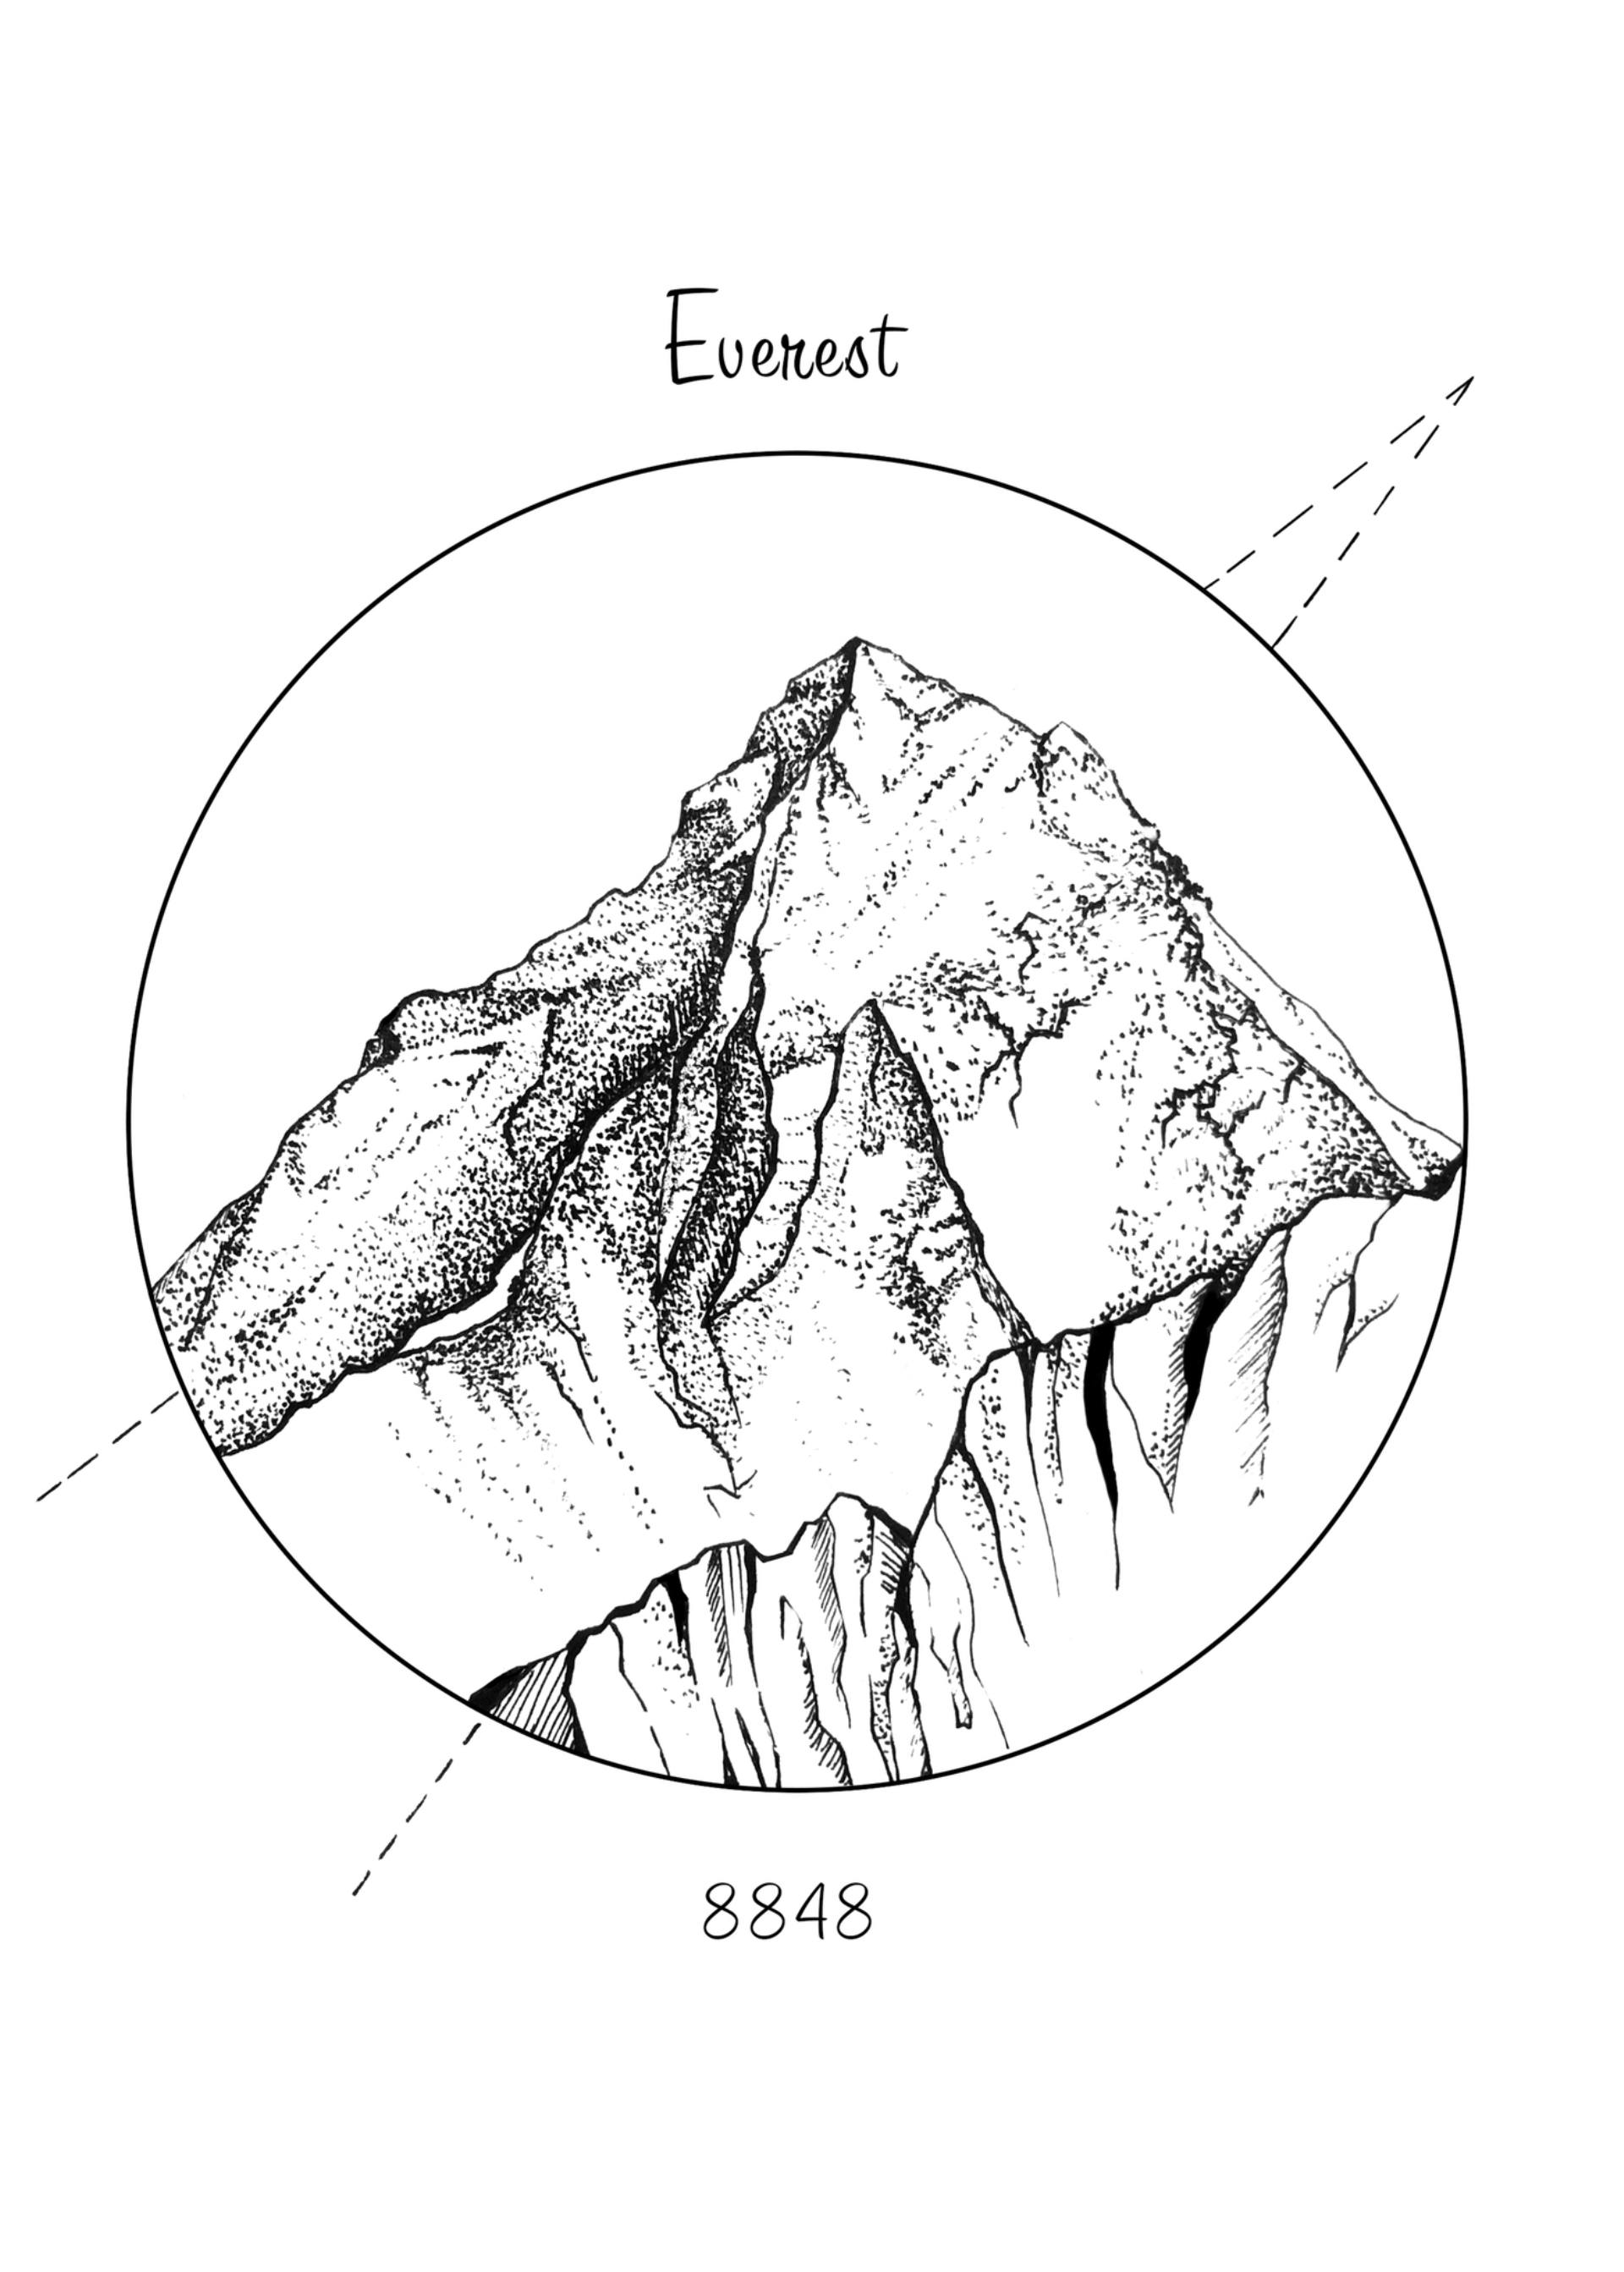 78. Found. drawing images for 'Everest'. 